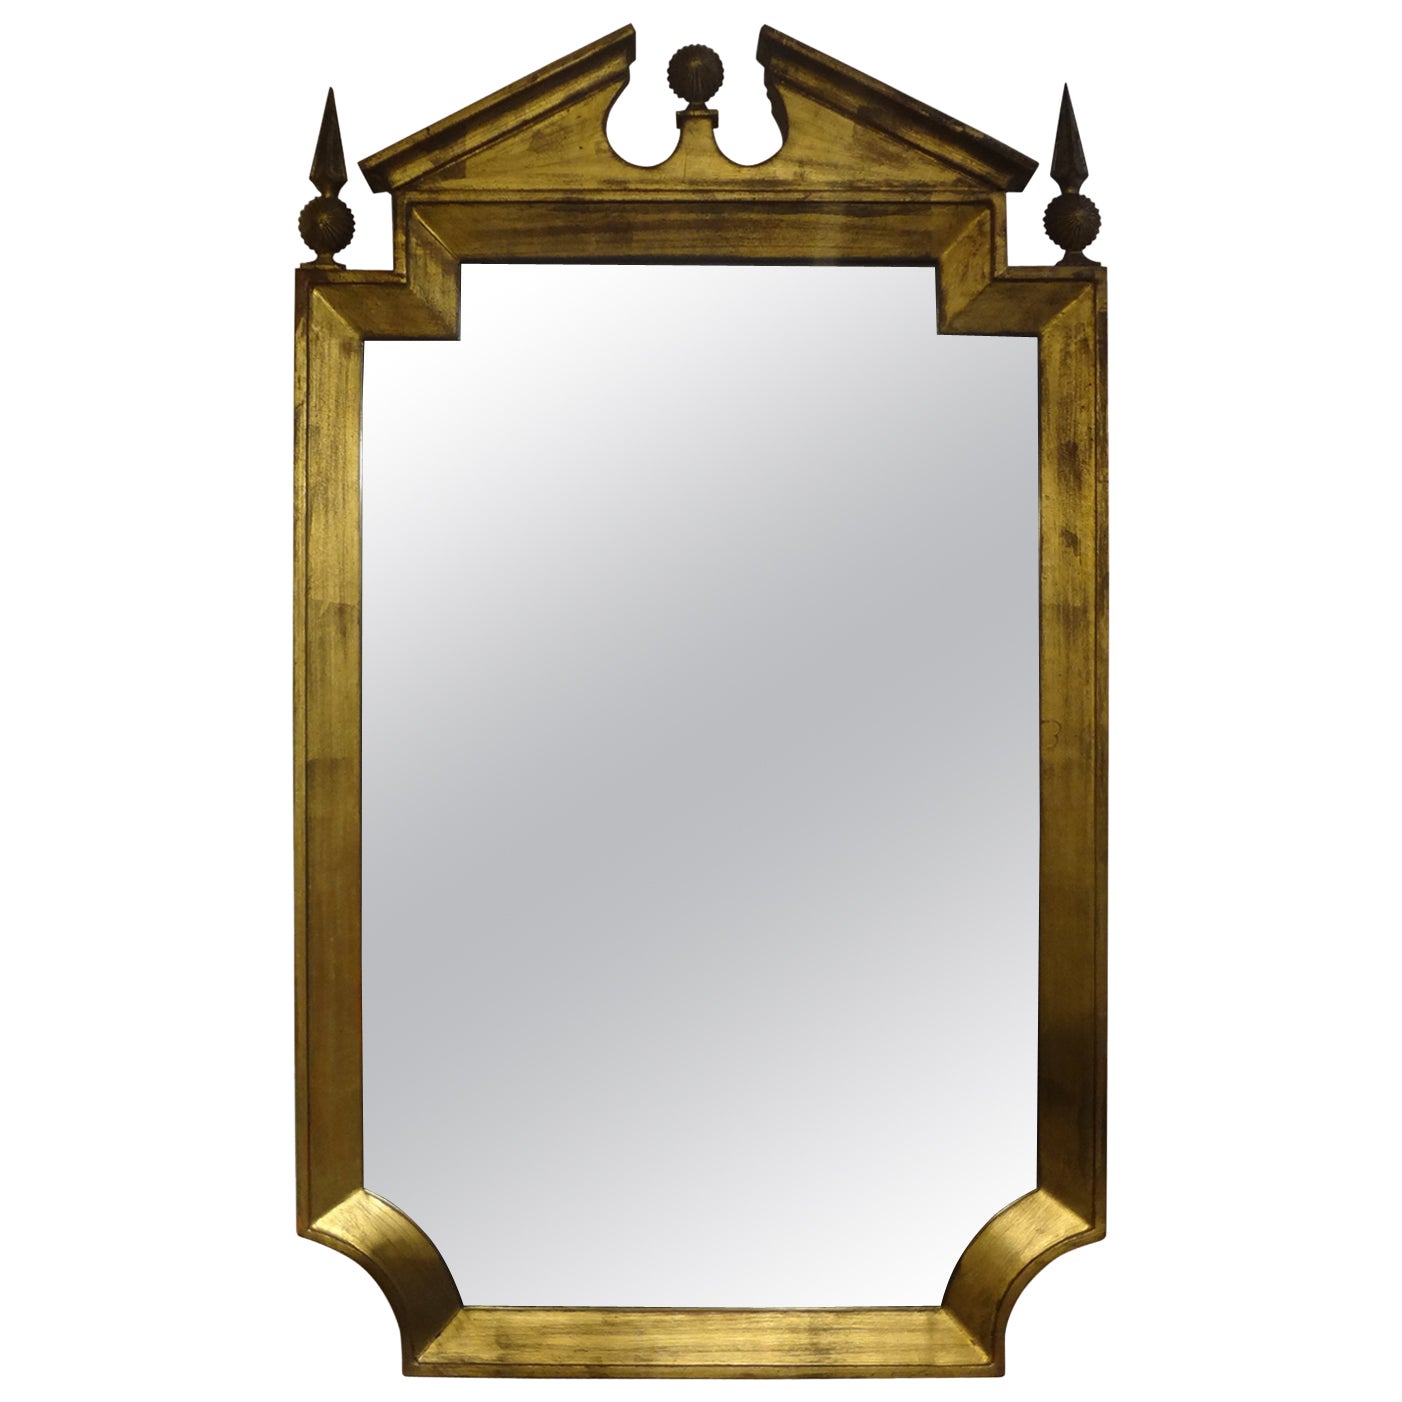 Italian Neoclassical Style Giltwood Mirror By Palladio